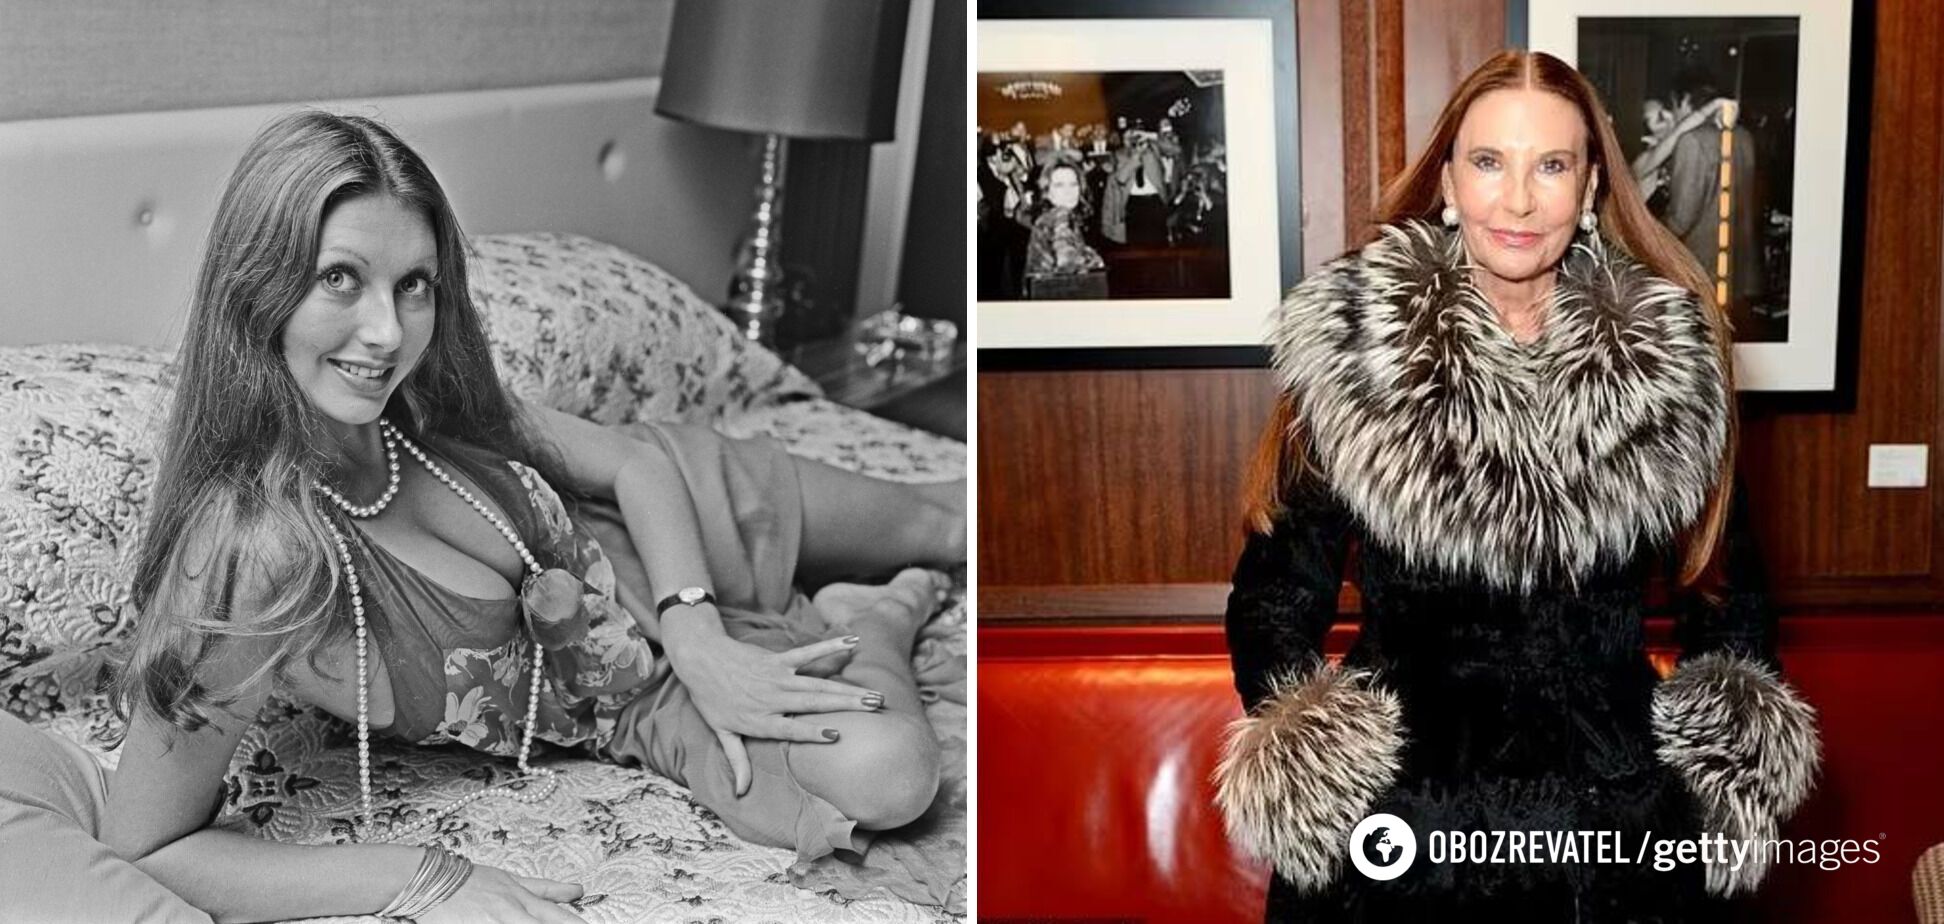 ''It's all about money'': how the first Playboy model looked like and how her fate turned out. Photo with a difference of 50 years